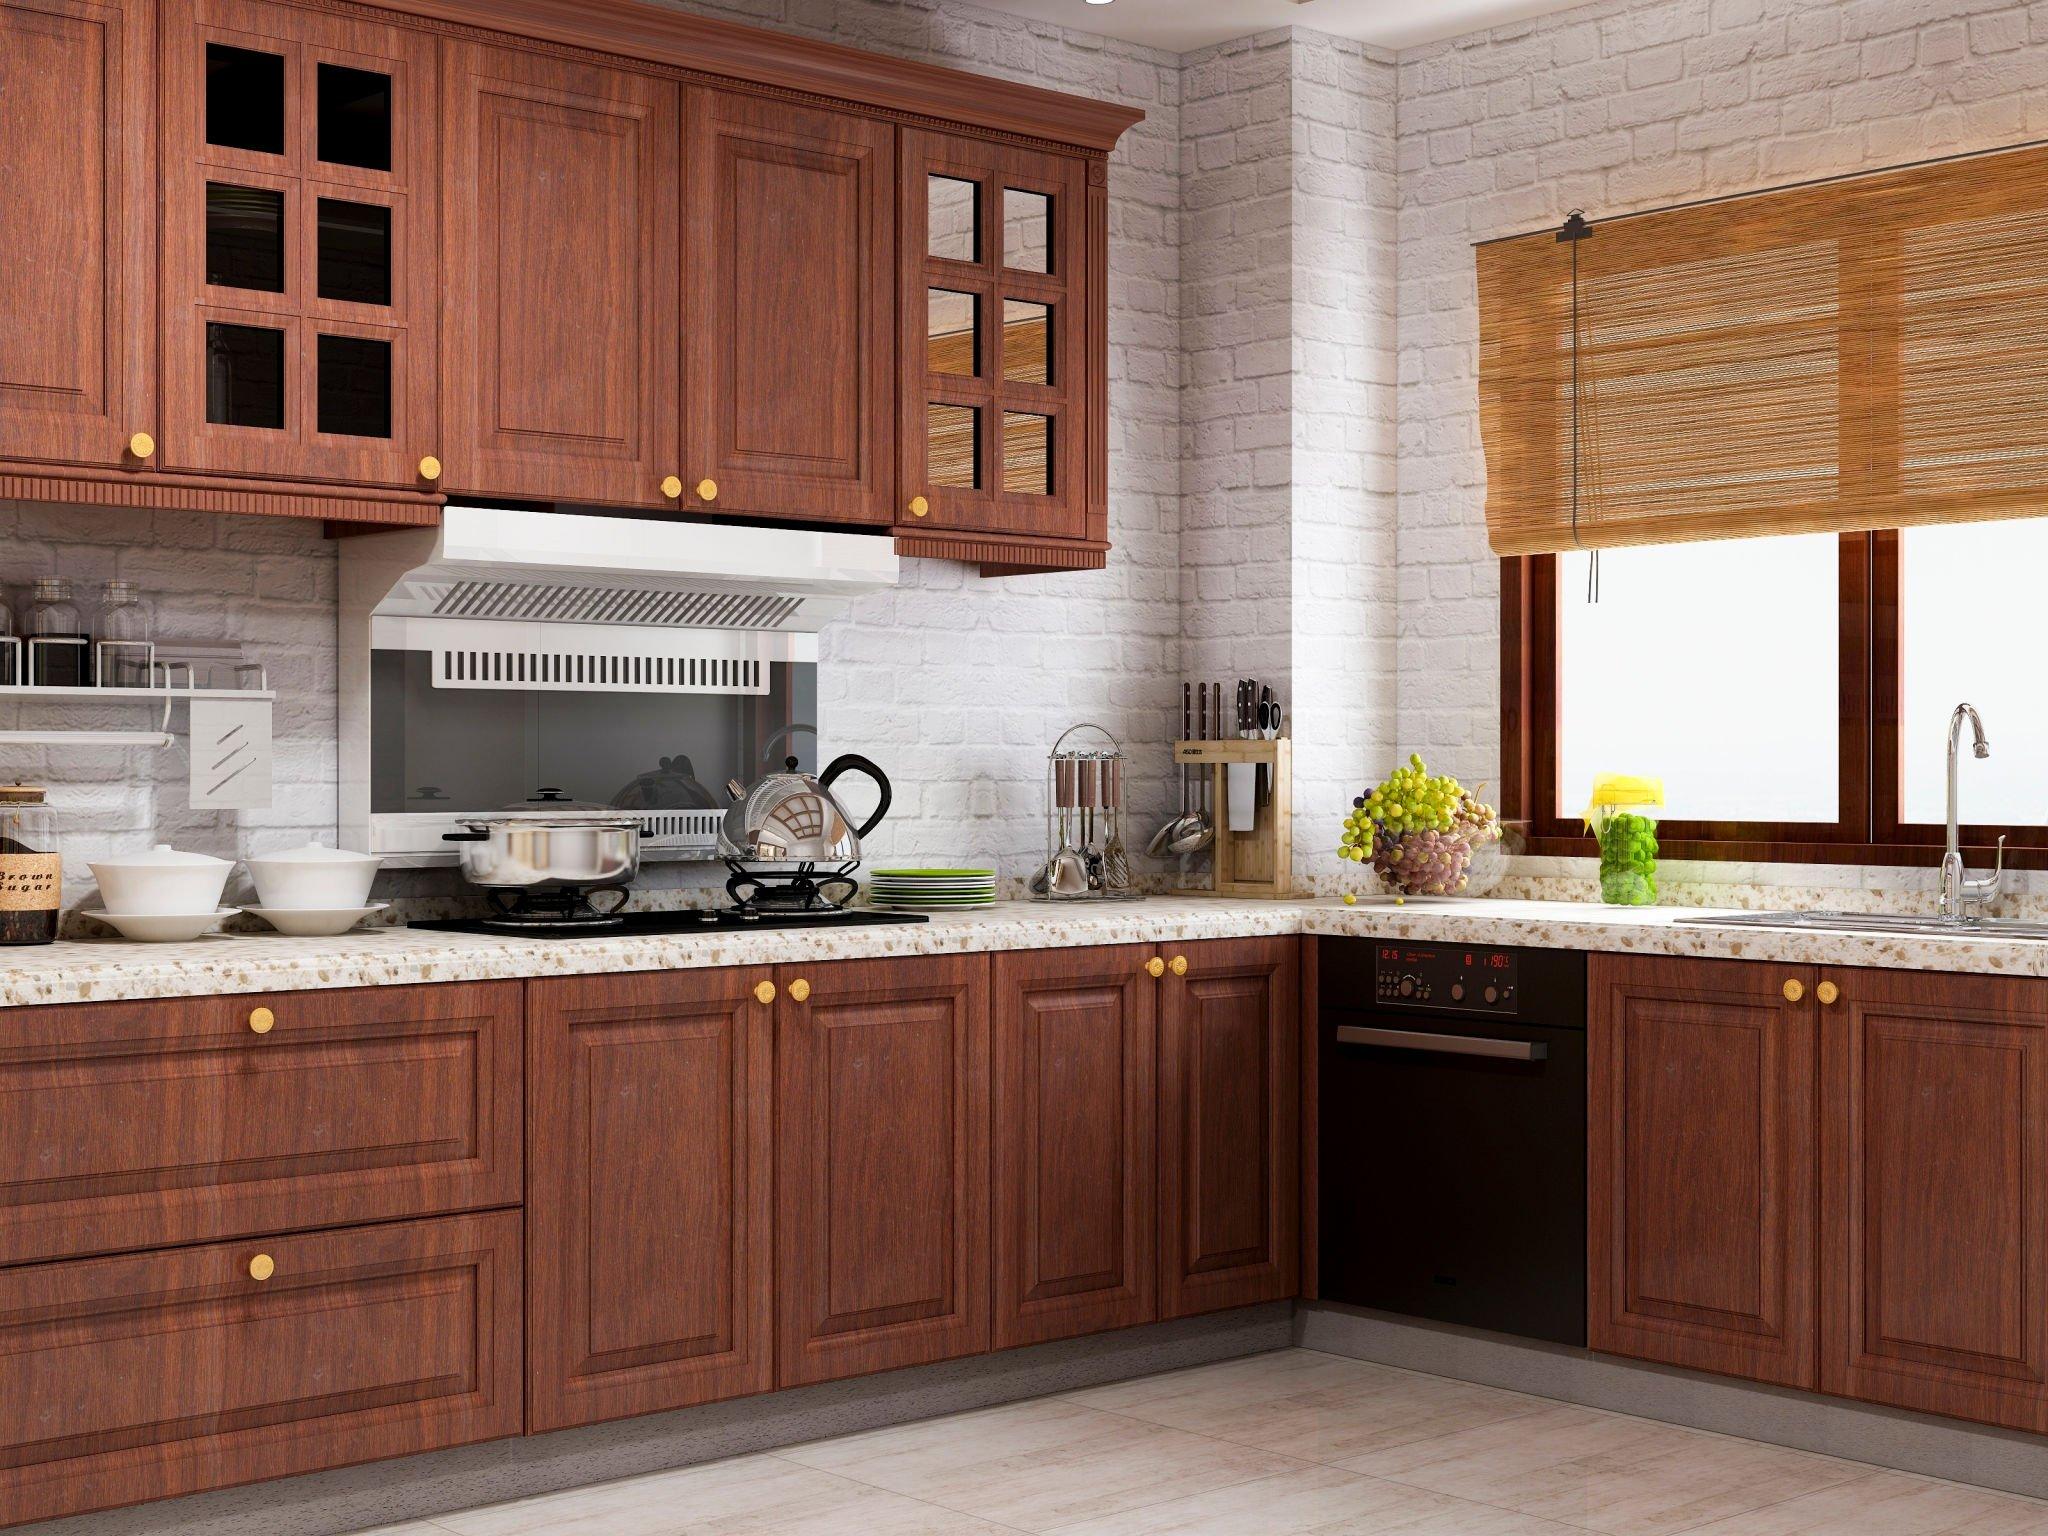 Choosing the Right Wood for Your Kitchen Cabinets